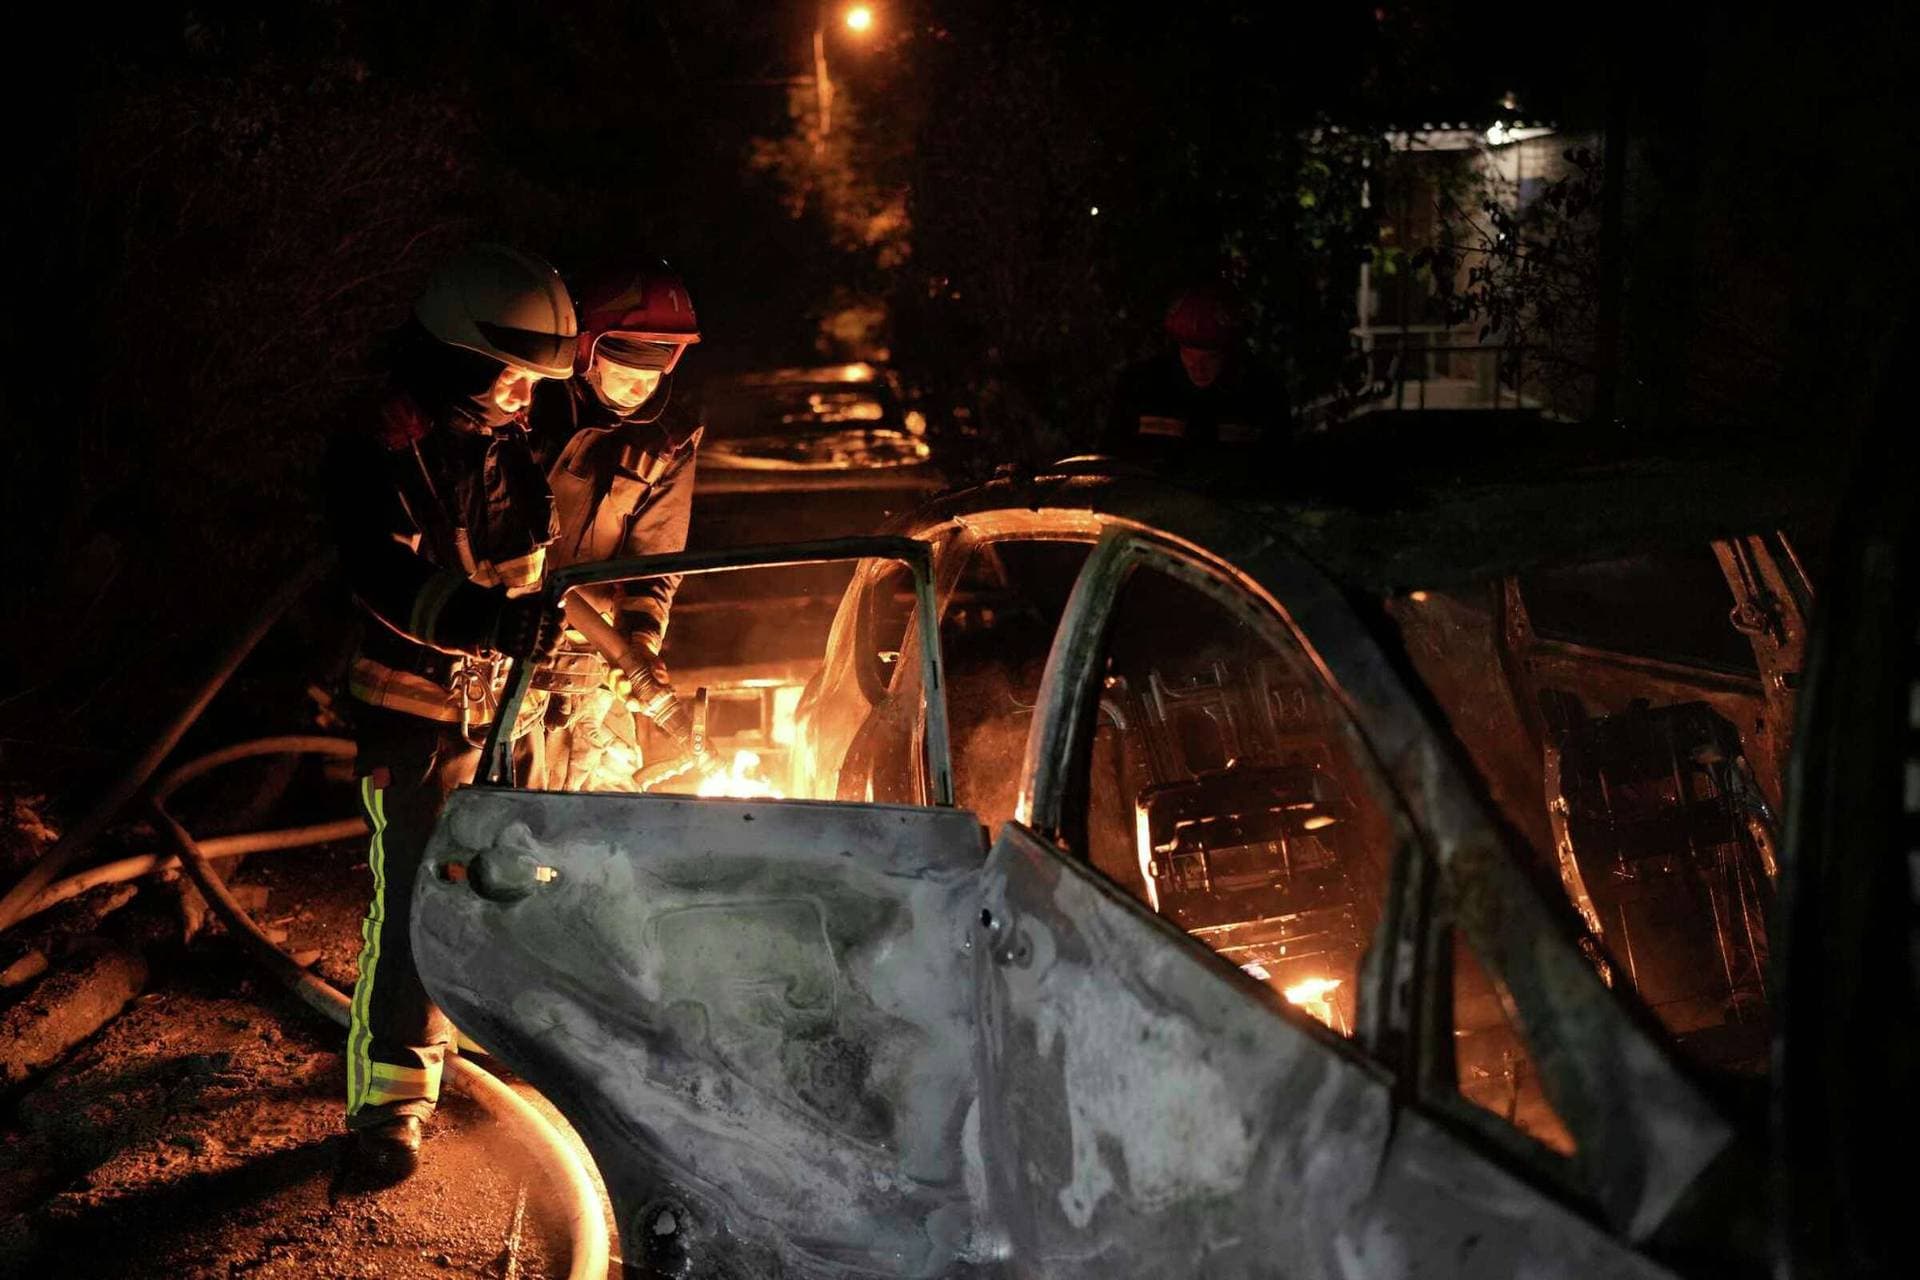 Emergency workers extinguish a fire in a parked car, caused by falling debris from the latest aerial Russian attack in Kyiv